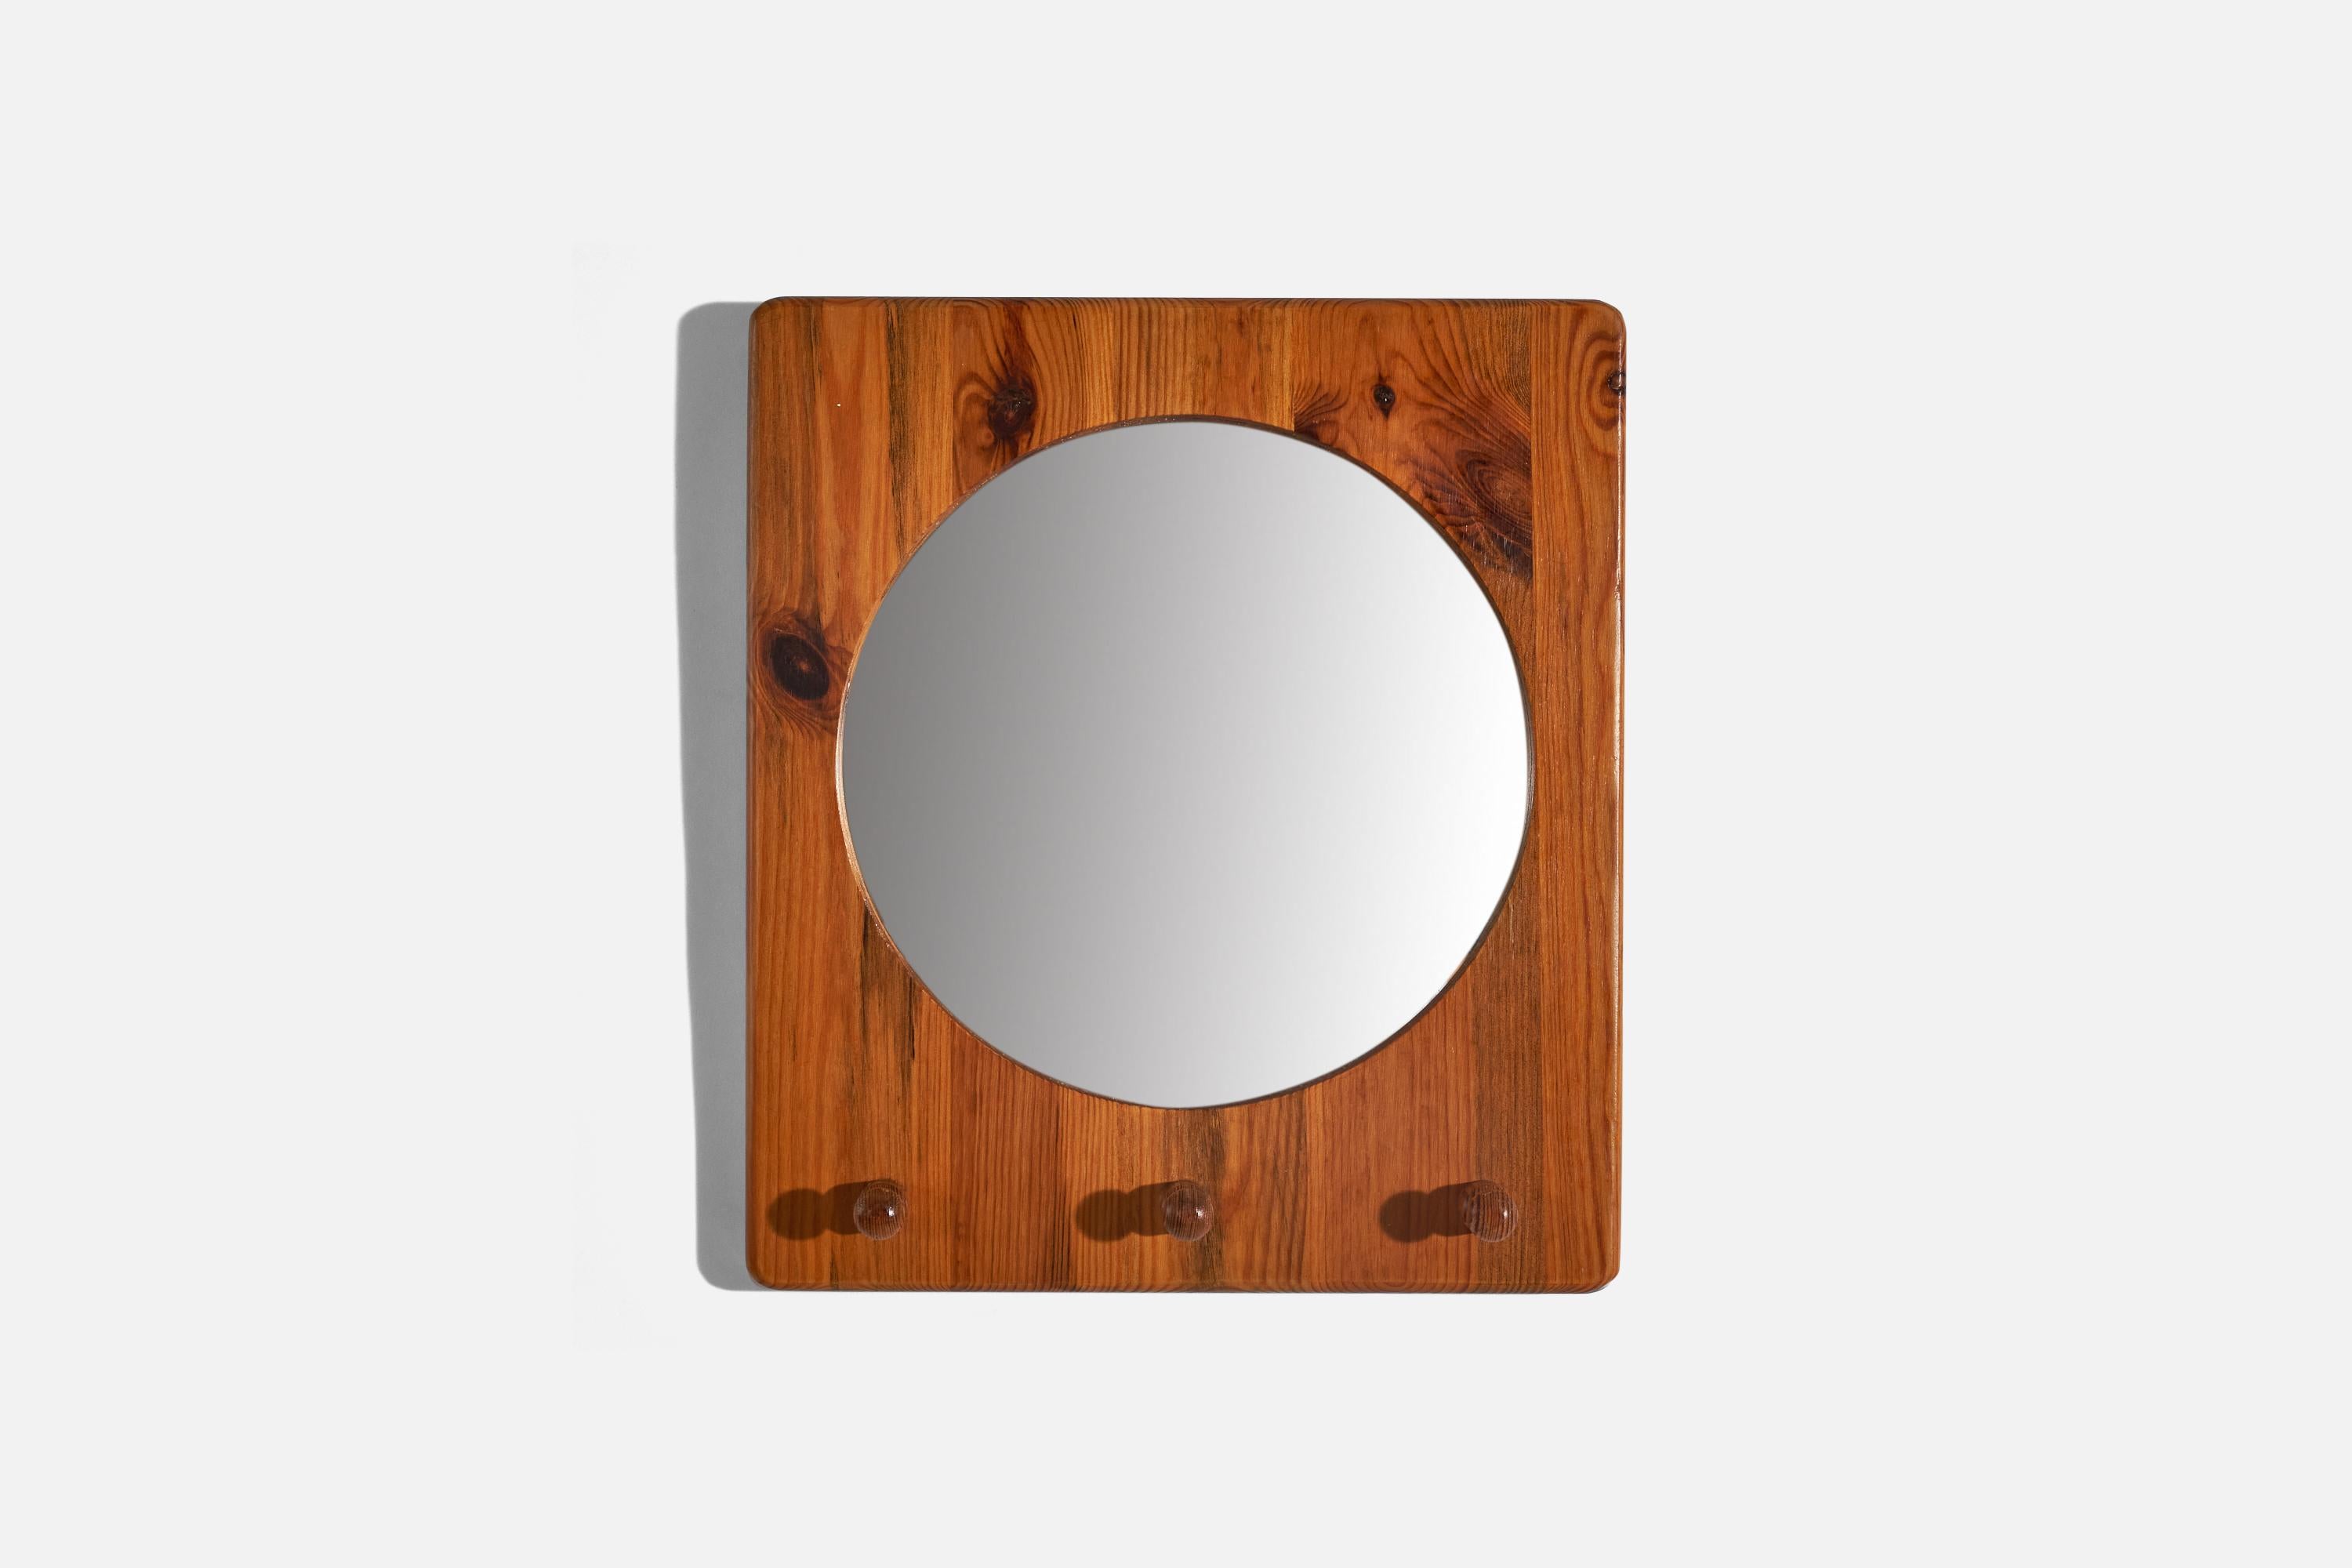 A pair of pine wall mirrors designed by Stig Johnsson and produced by his firm Smålandsslöjd, Värnamo, Sweden, 1970s.